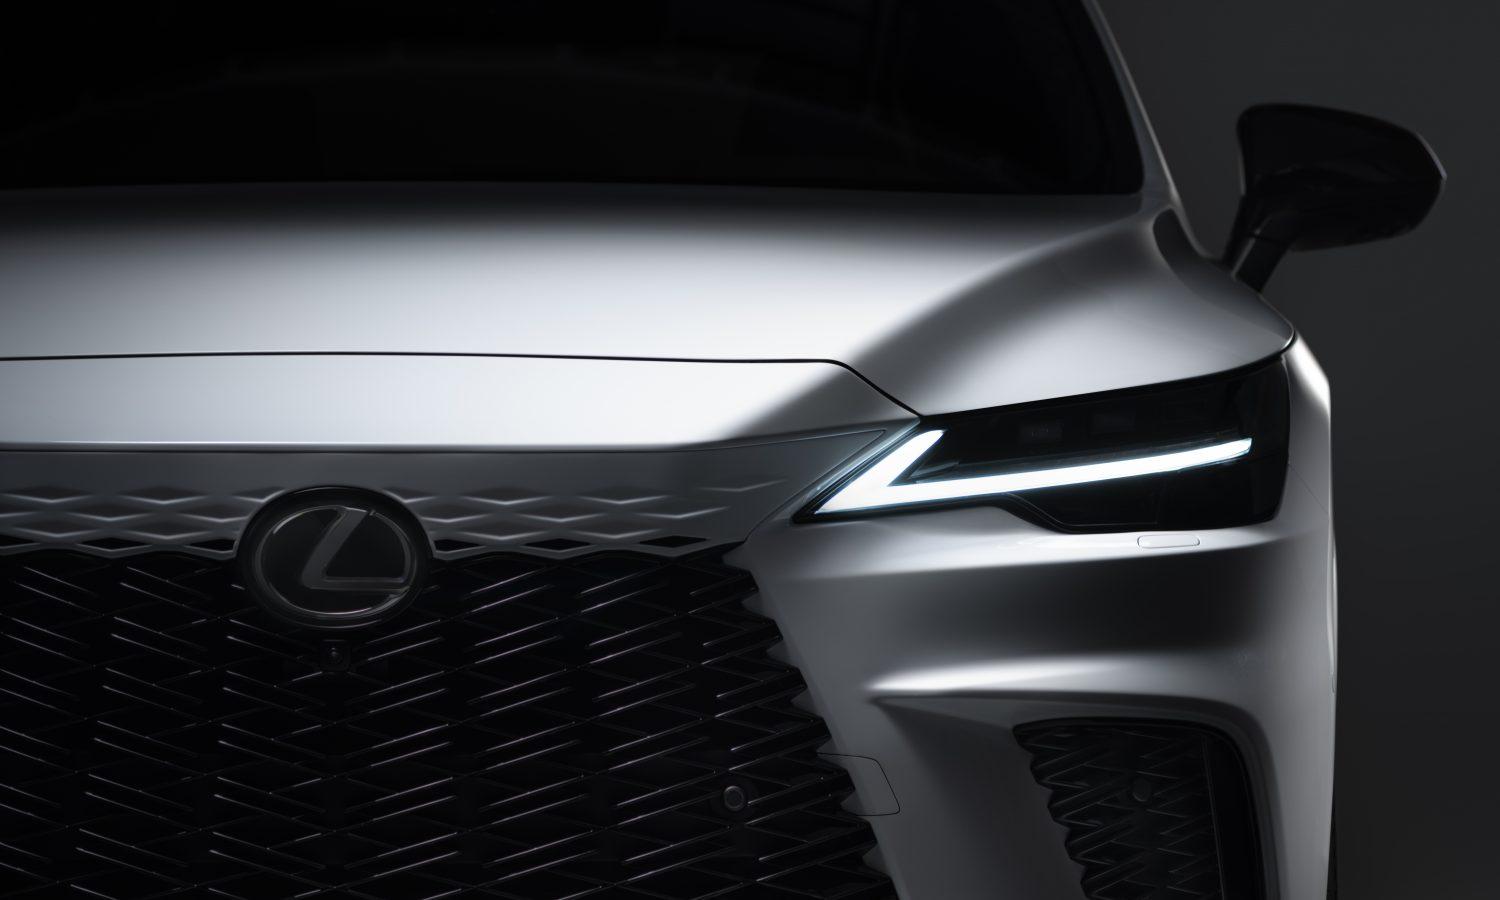 The all-new 2023 Lexus RX is coming